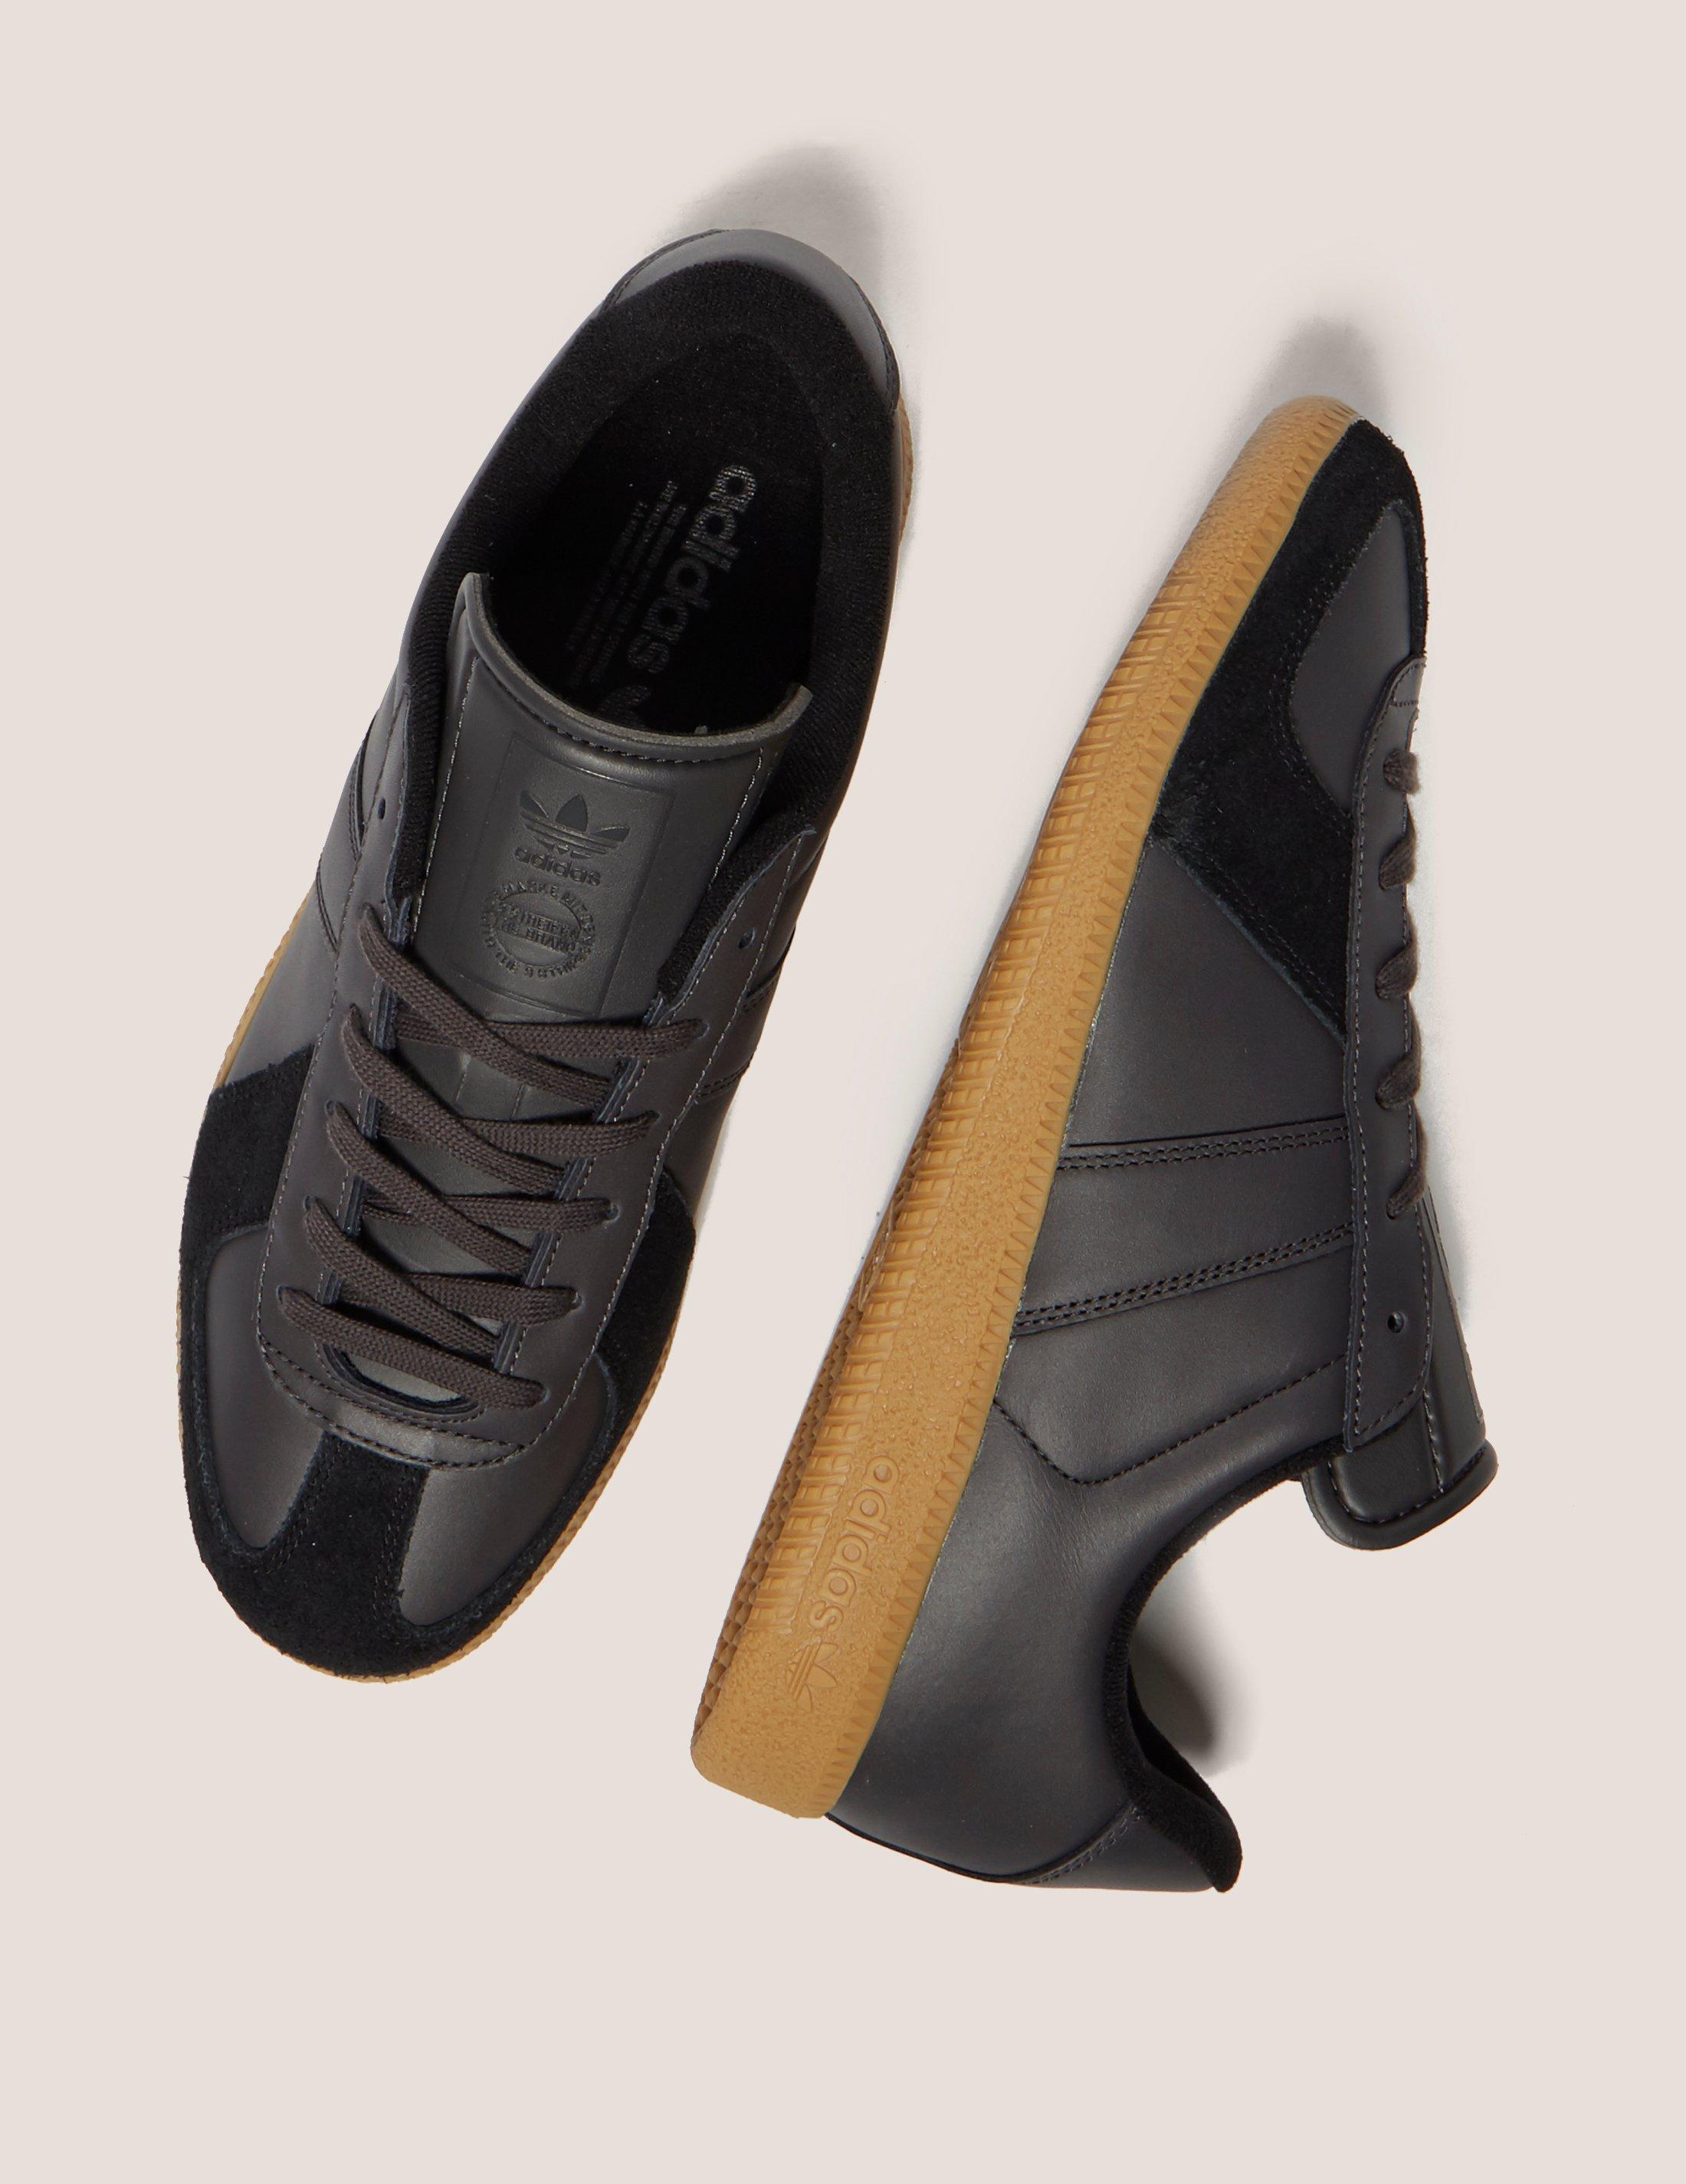 adidas Originals Leather Bw Army Clean in Black for Men - Lyst